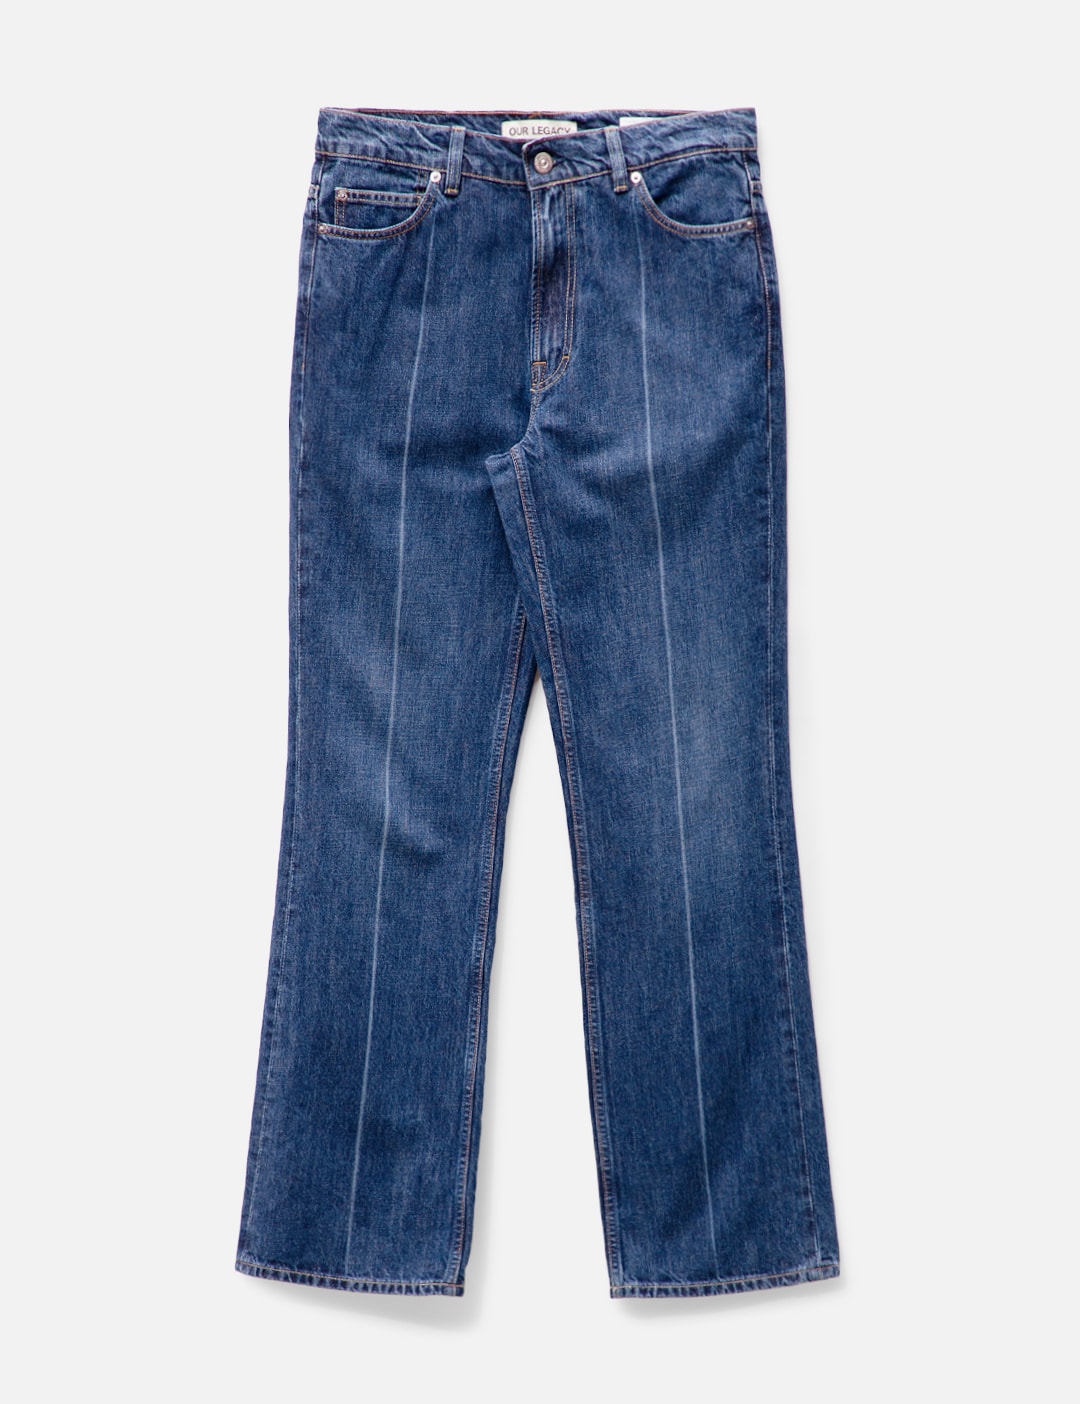 Our Legacy - 70s Cut Jeans | HBX - Globally Curated Fashion and ...